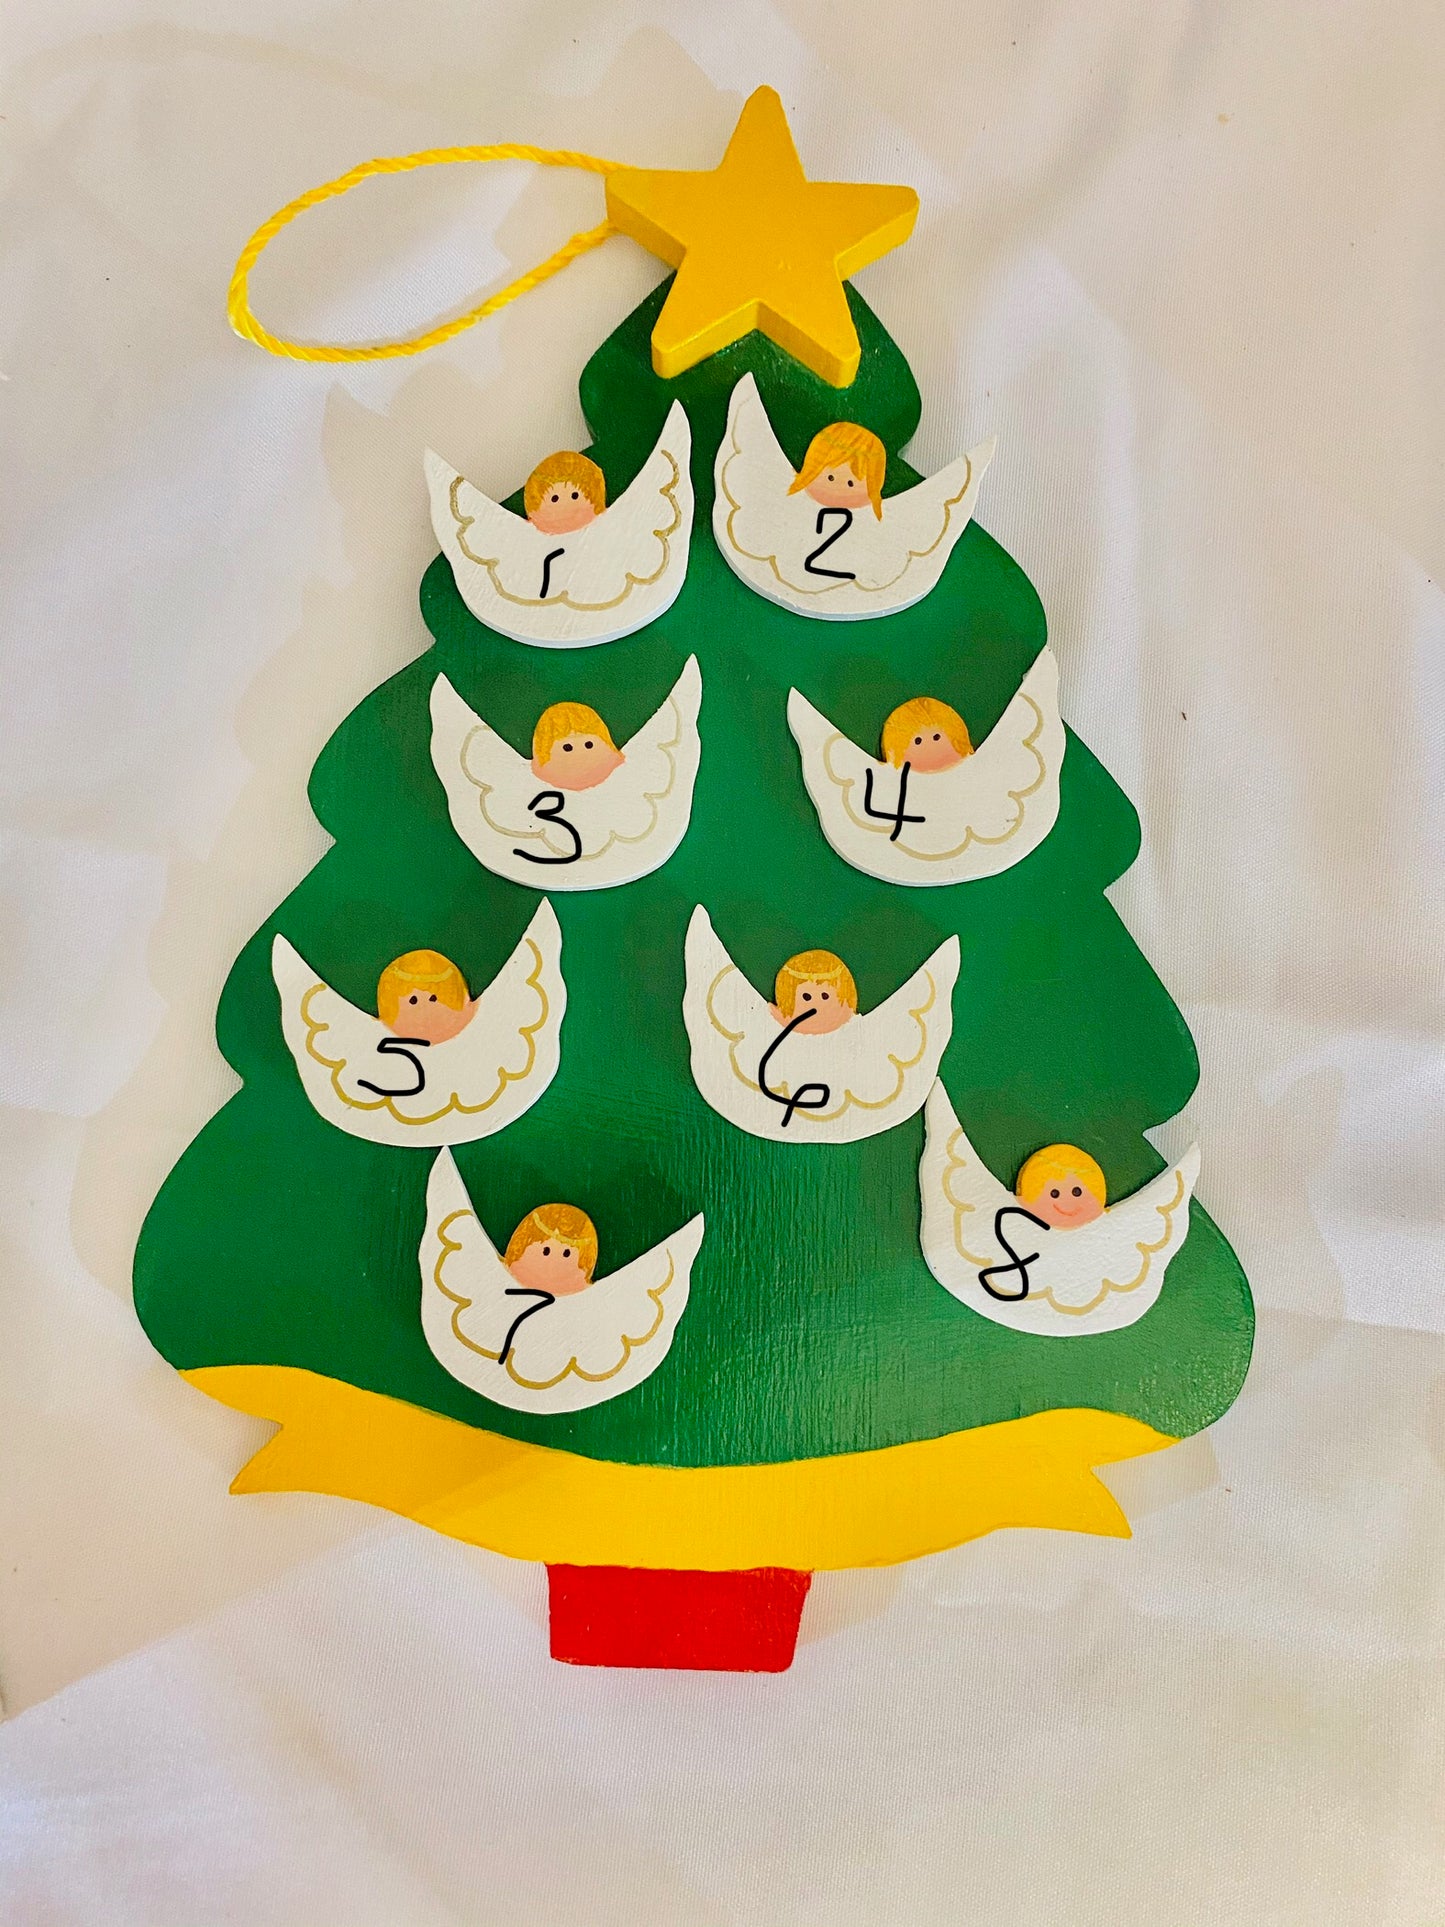 Personalized Ornament 8 Angels on a Christmas Tree  7.5" x6"